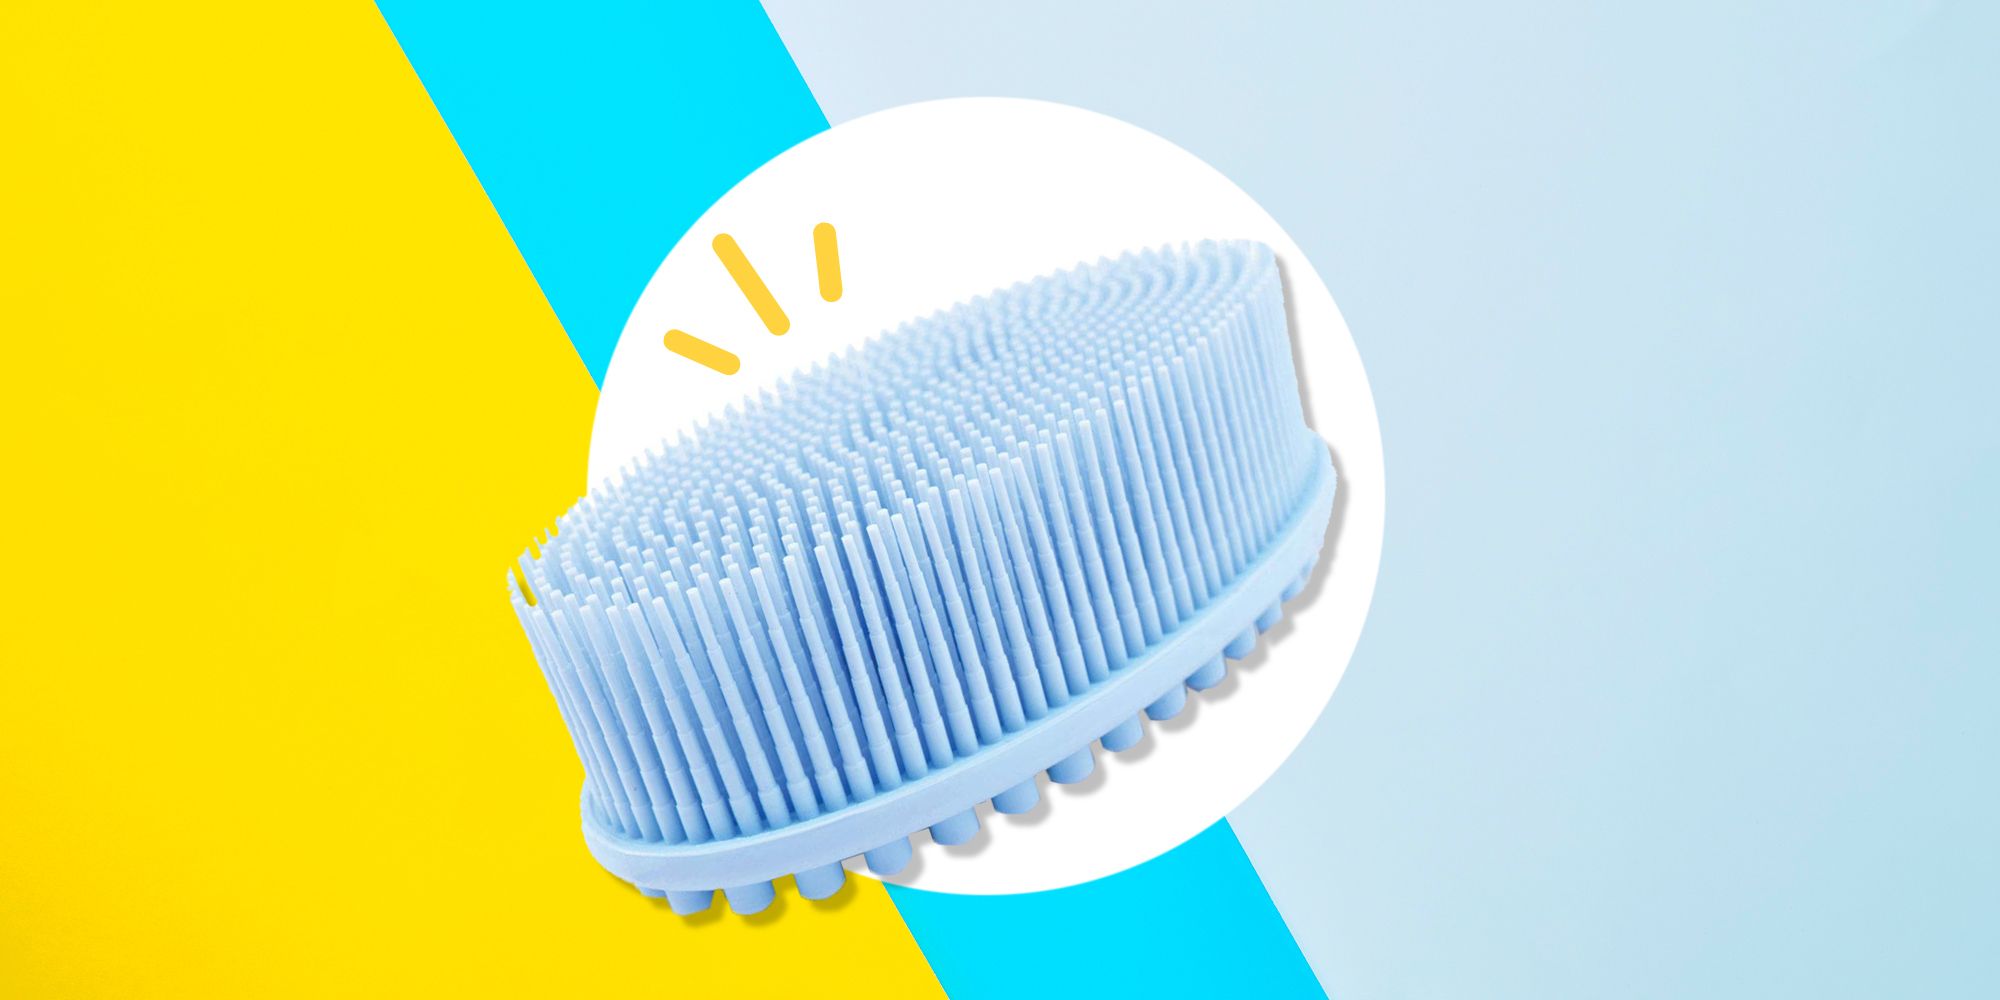 Silicone Soft Baby Brush Skin Scrubber Blue More Hygienic Than Rough Traditional Loofahs Soft Cradle cap Comb Baby Care Baby Bath Silicone Body Brush Exfoliating Body Scrubber Baby Loofah 